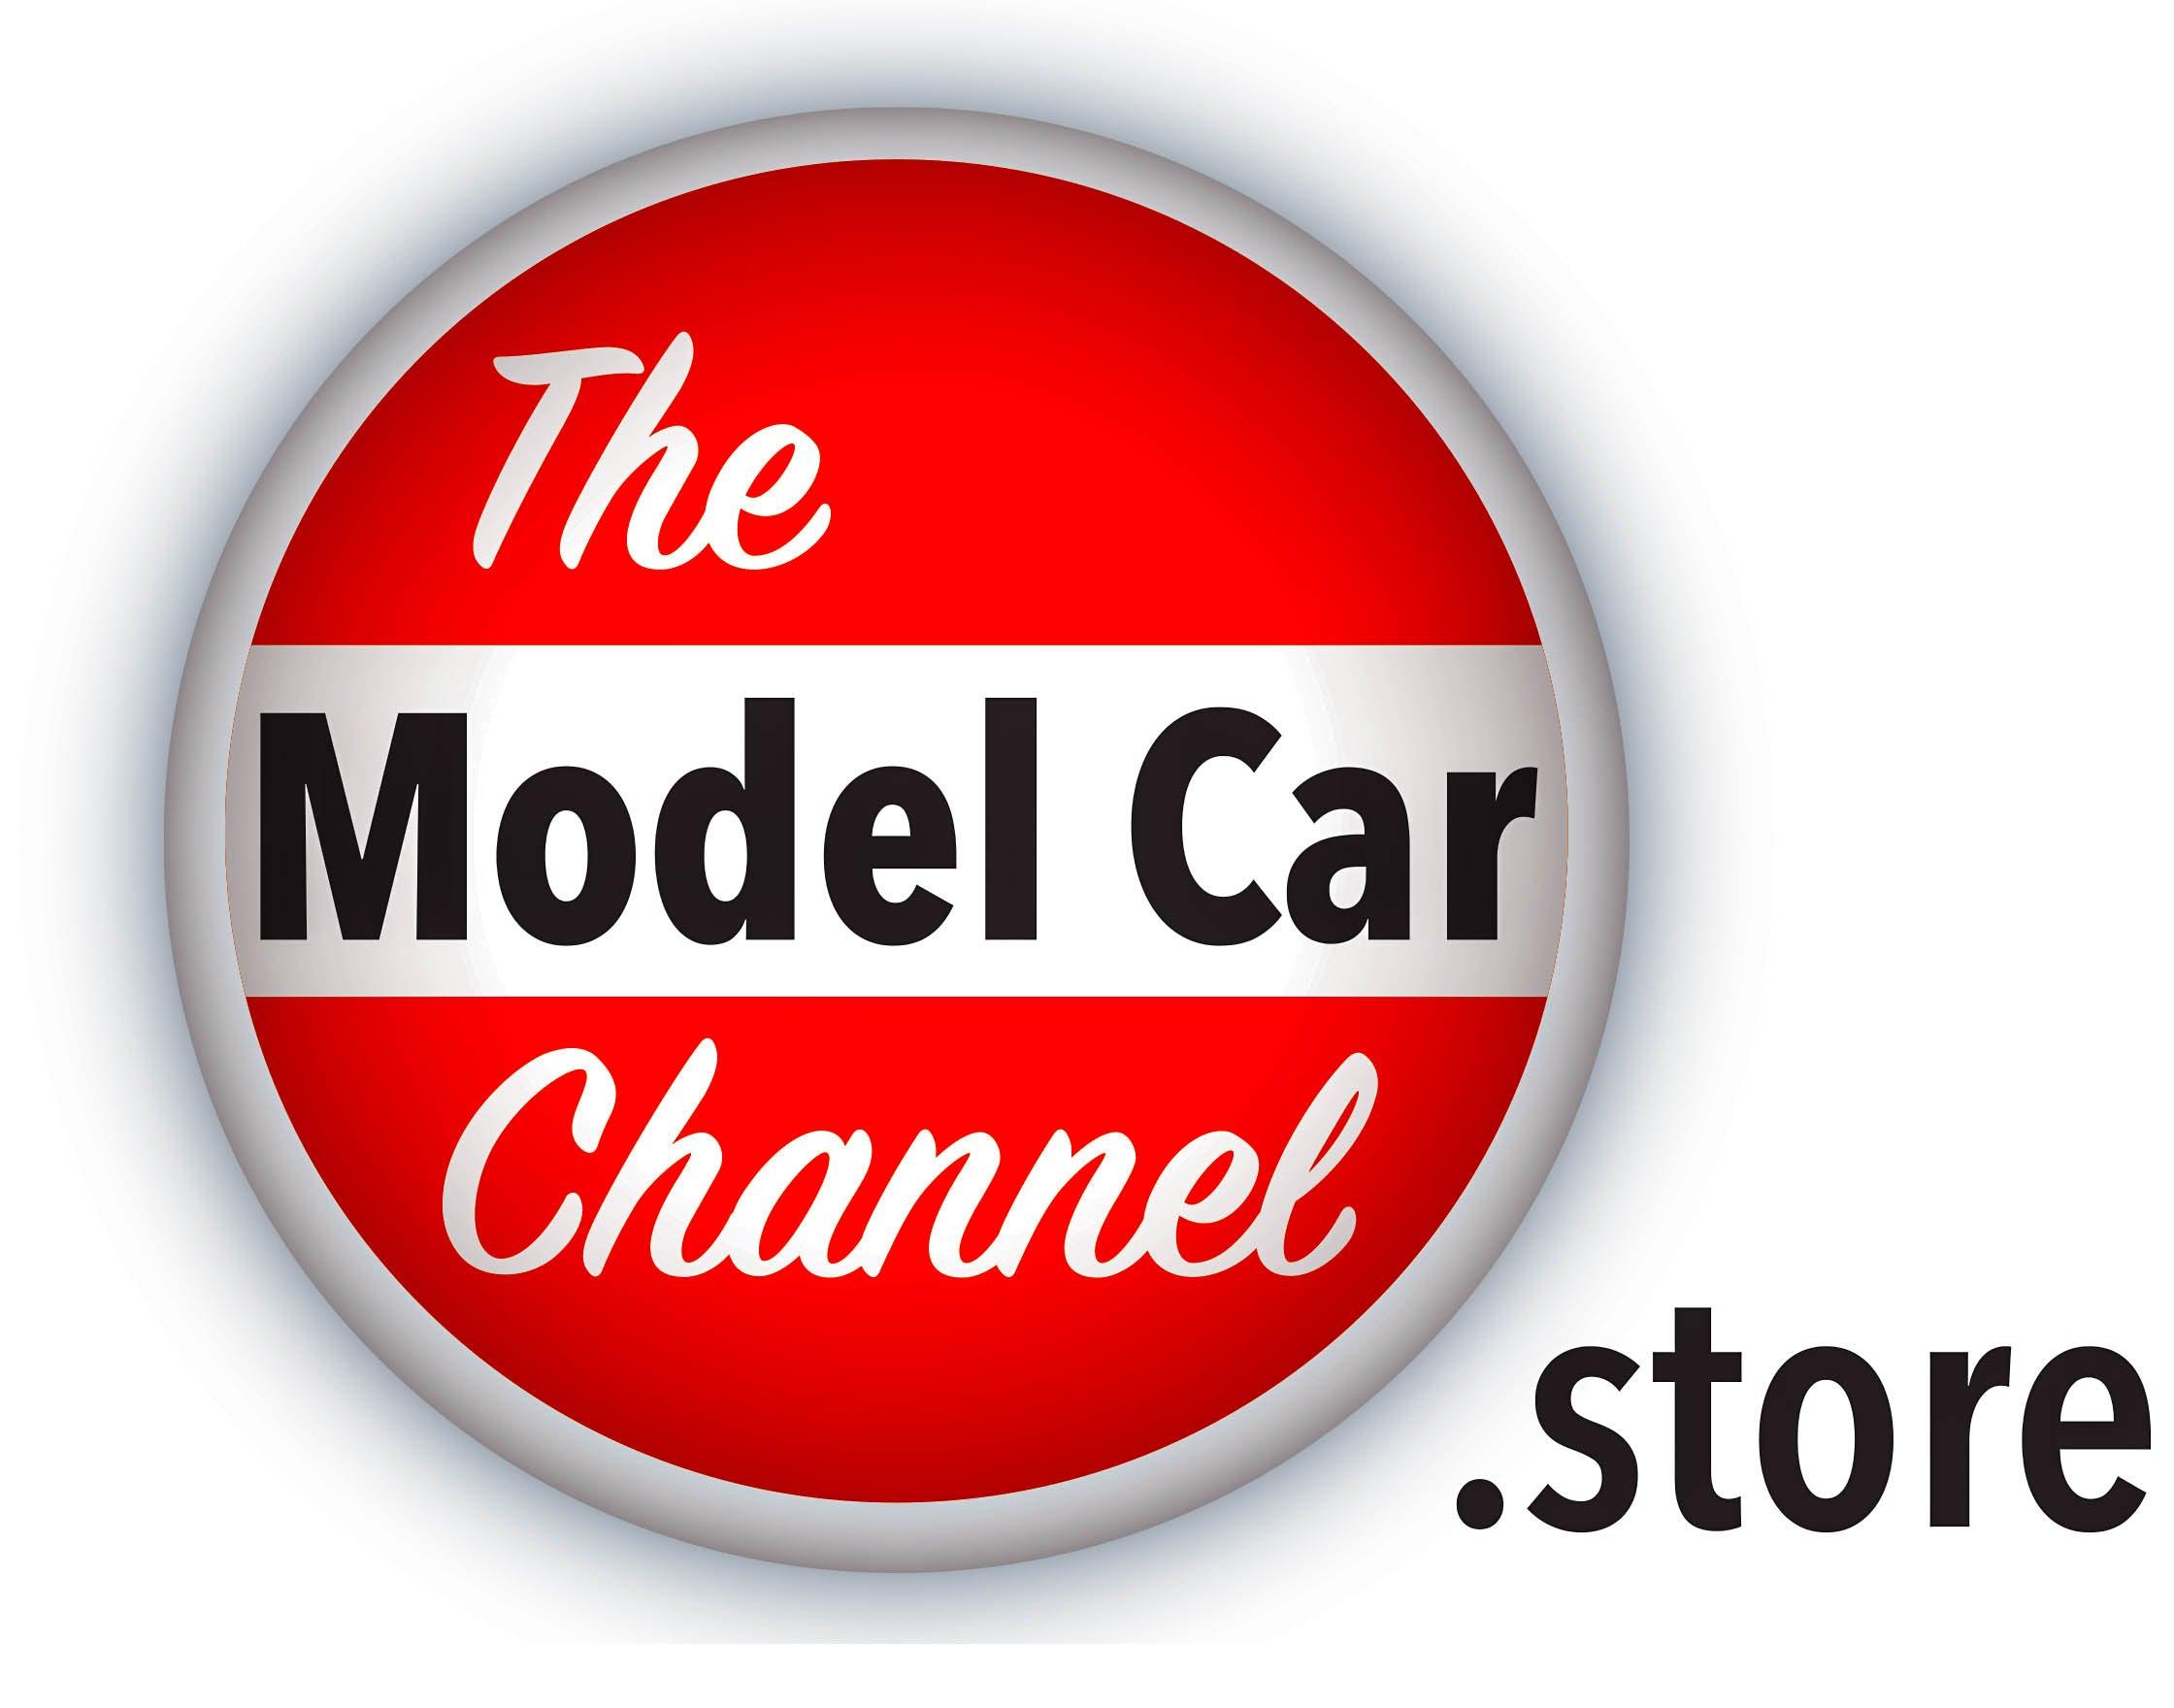 The Model Car Channel Store